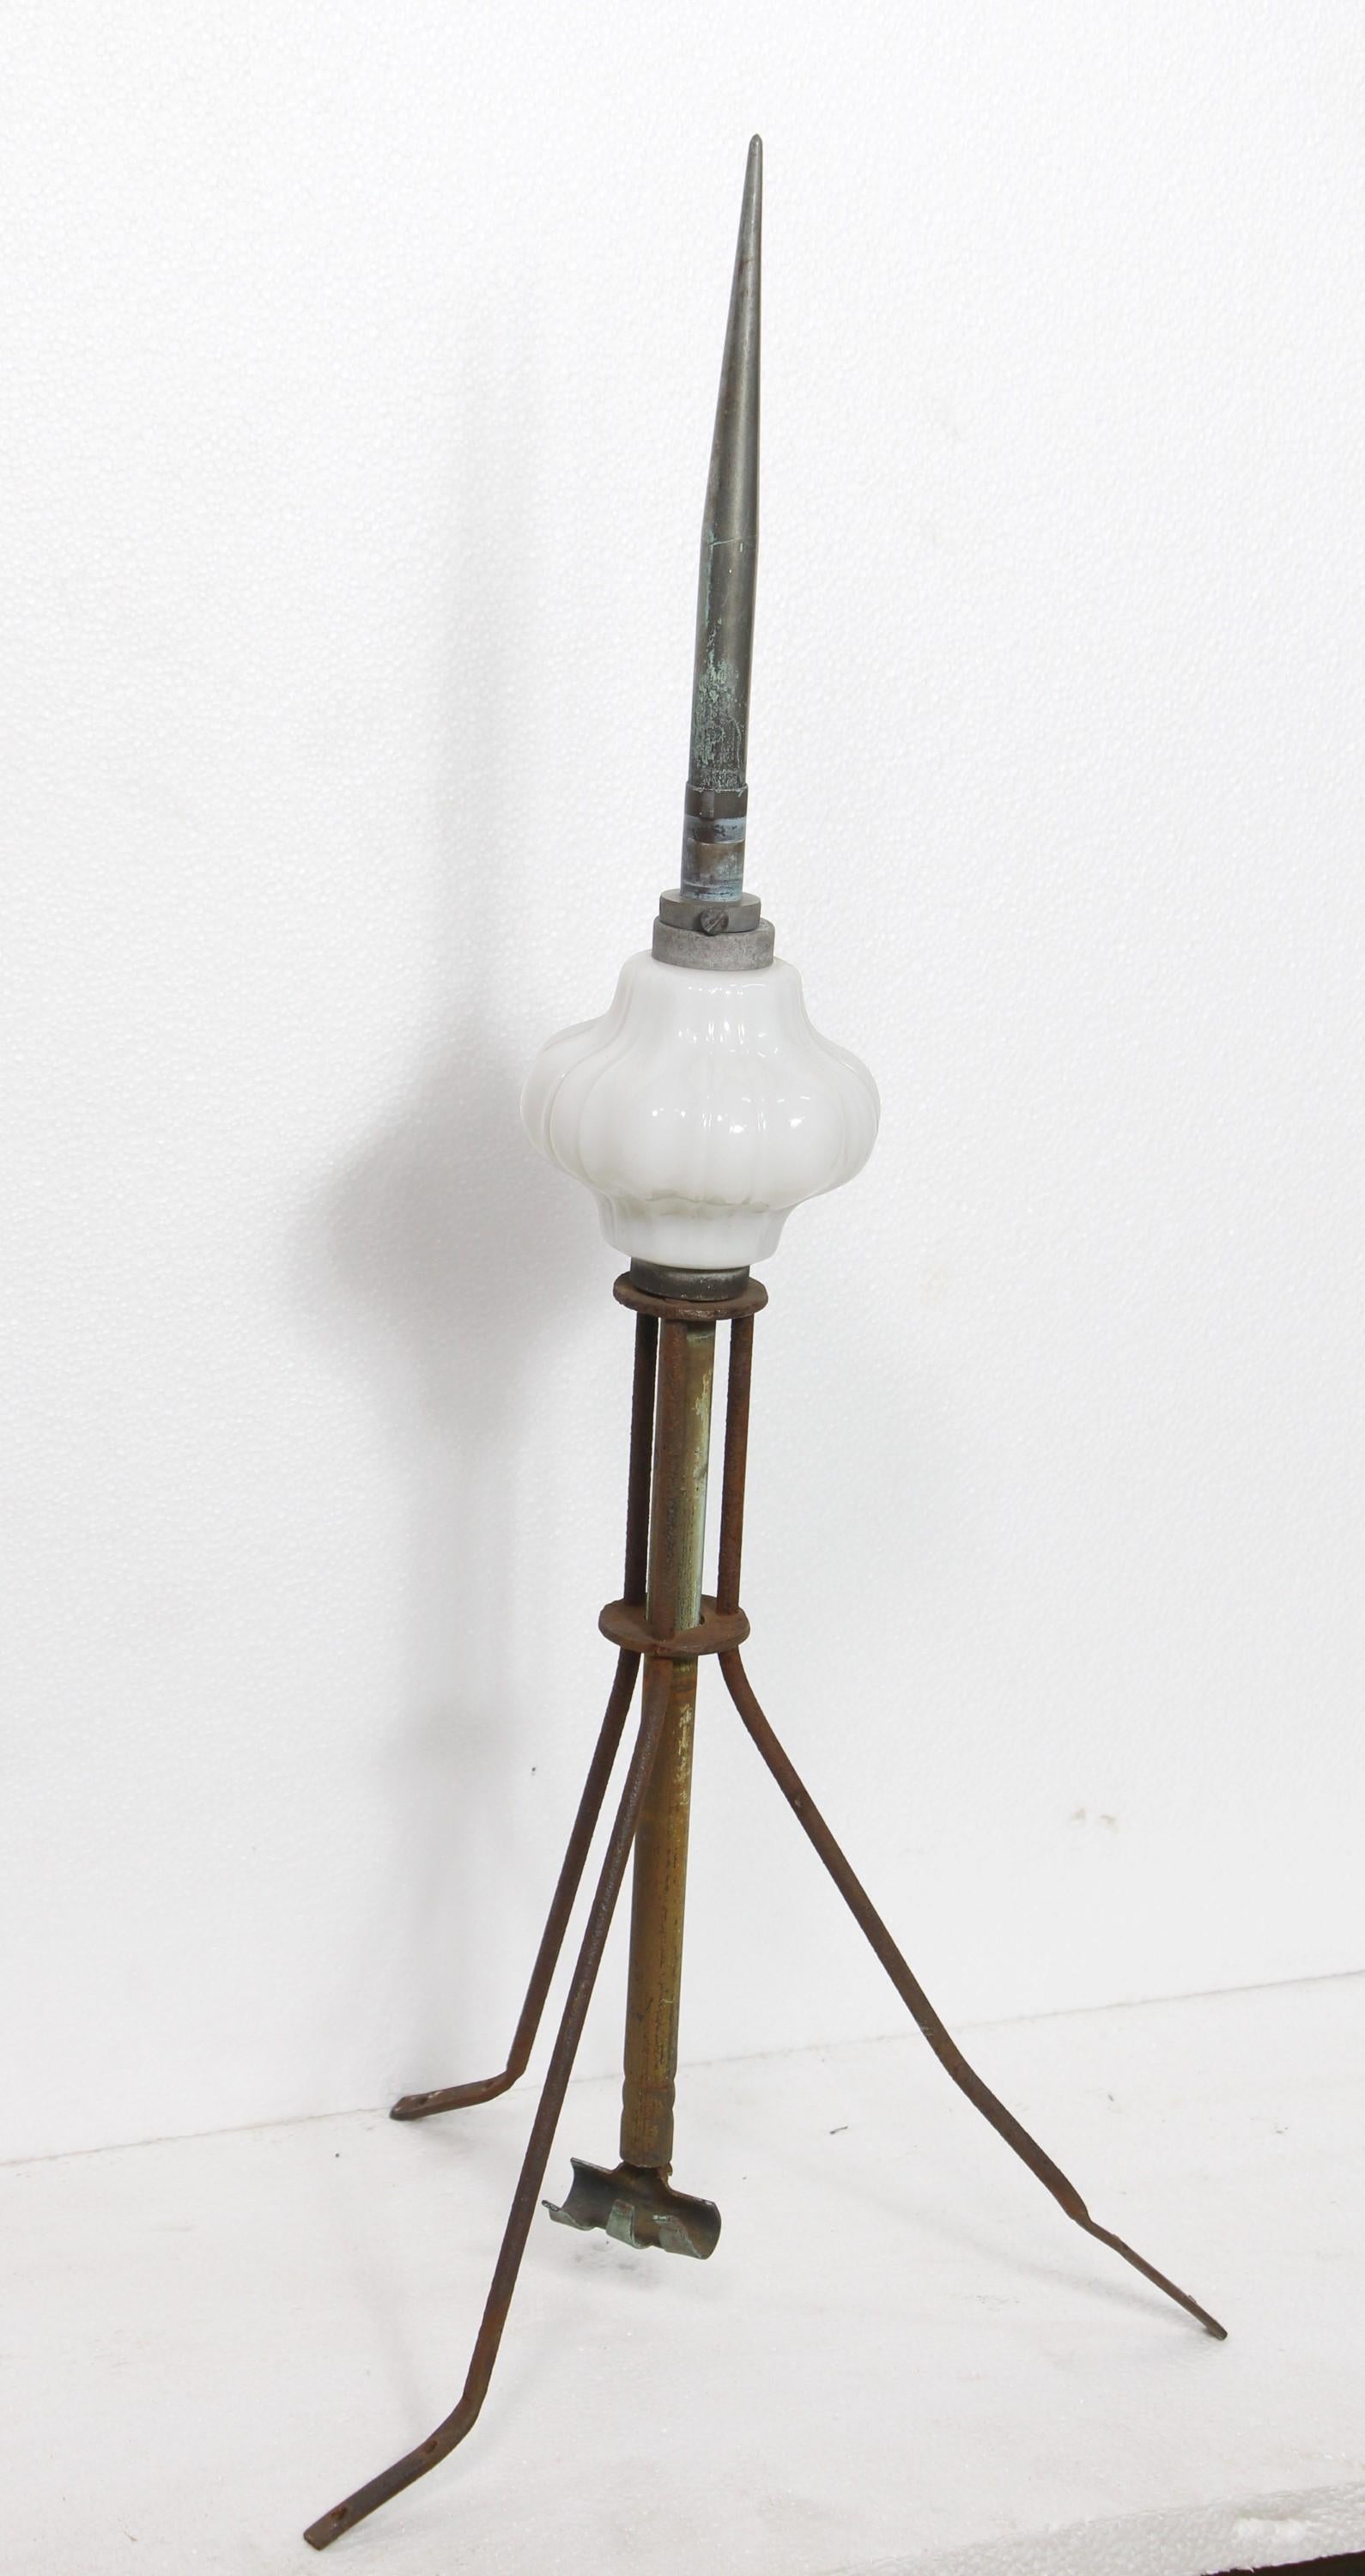 Antique turn of the century copper lightning rod. These were attached at the top point of a building with a metal connecting it to the ground. If the rod was struck by lighting typically the white glass indicator shade would break and show the rod